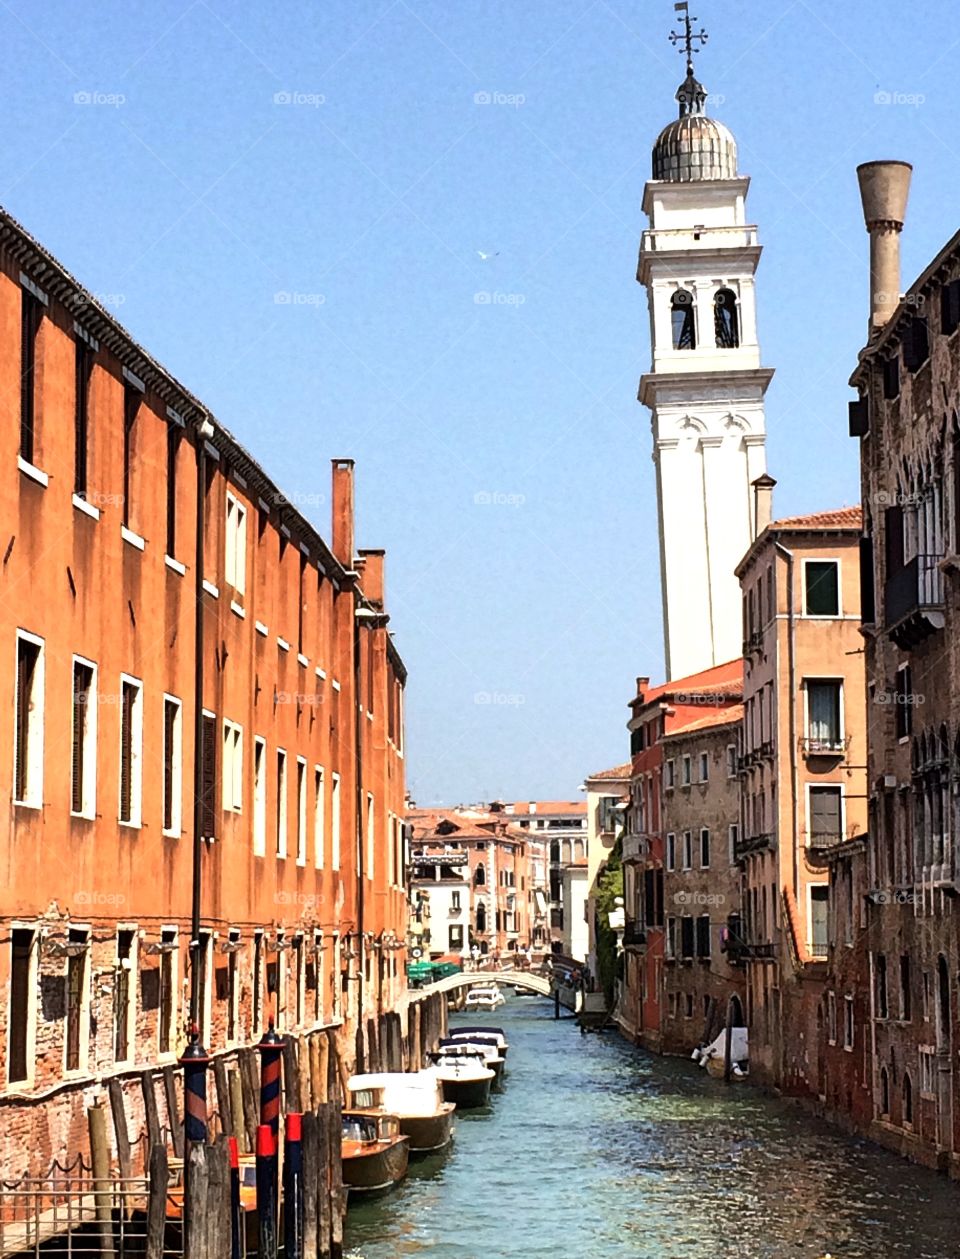 Summer in Venice. View of canal and historic buildings in Venice, Italy 